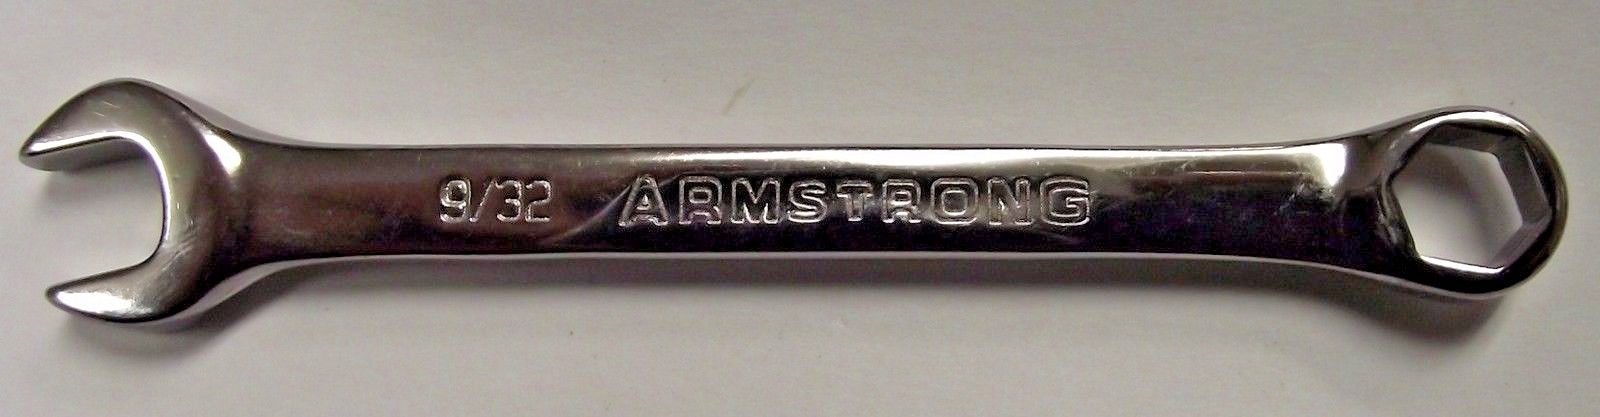 Armstrong 25-009 9/32" Combination Wrench USA